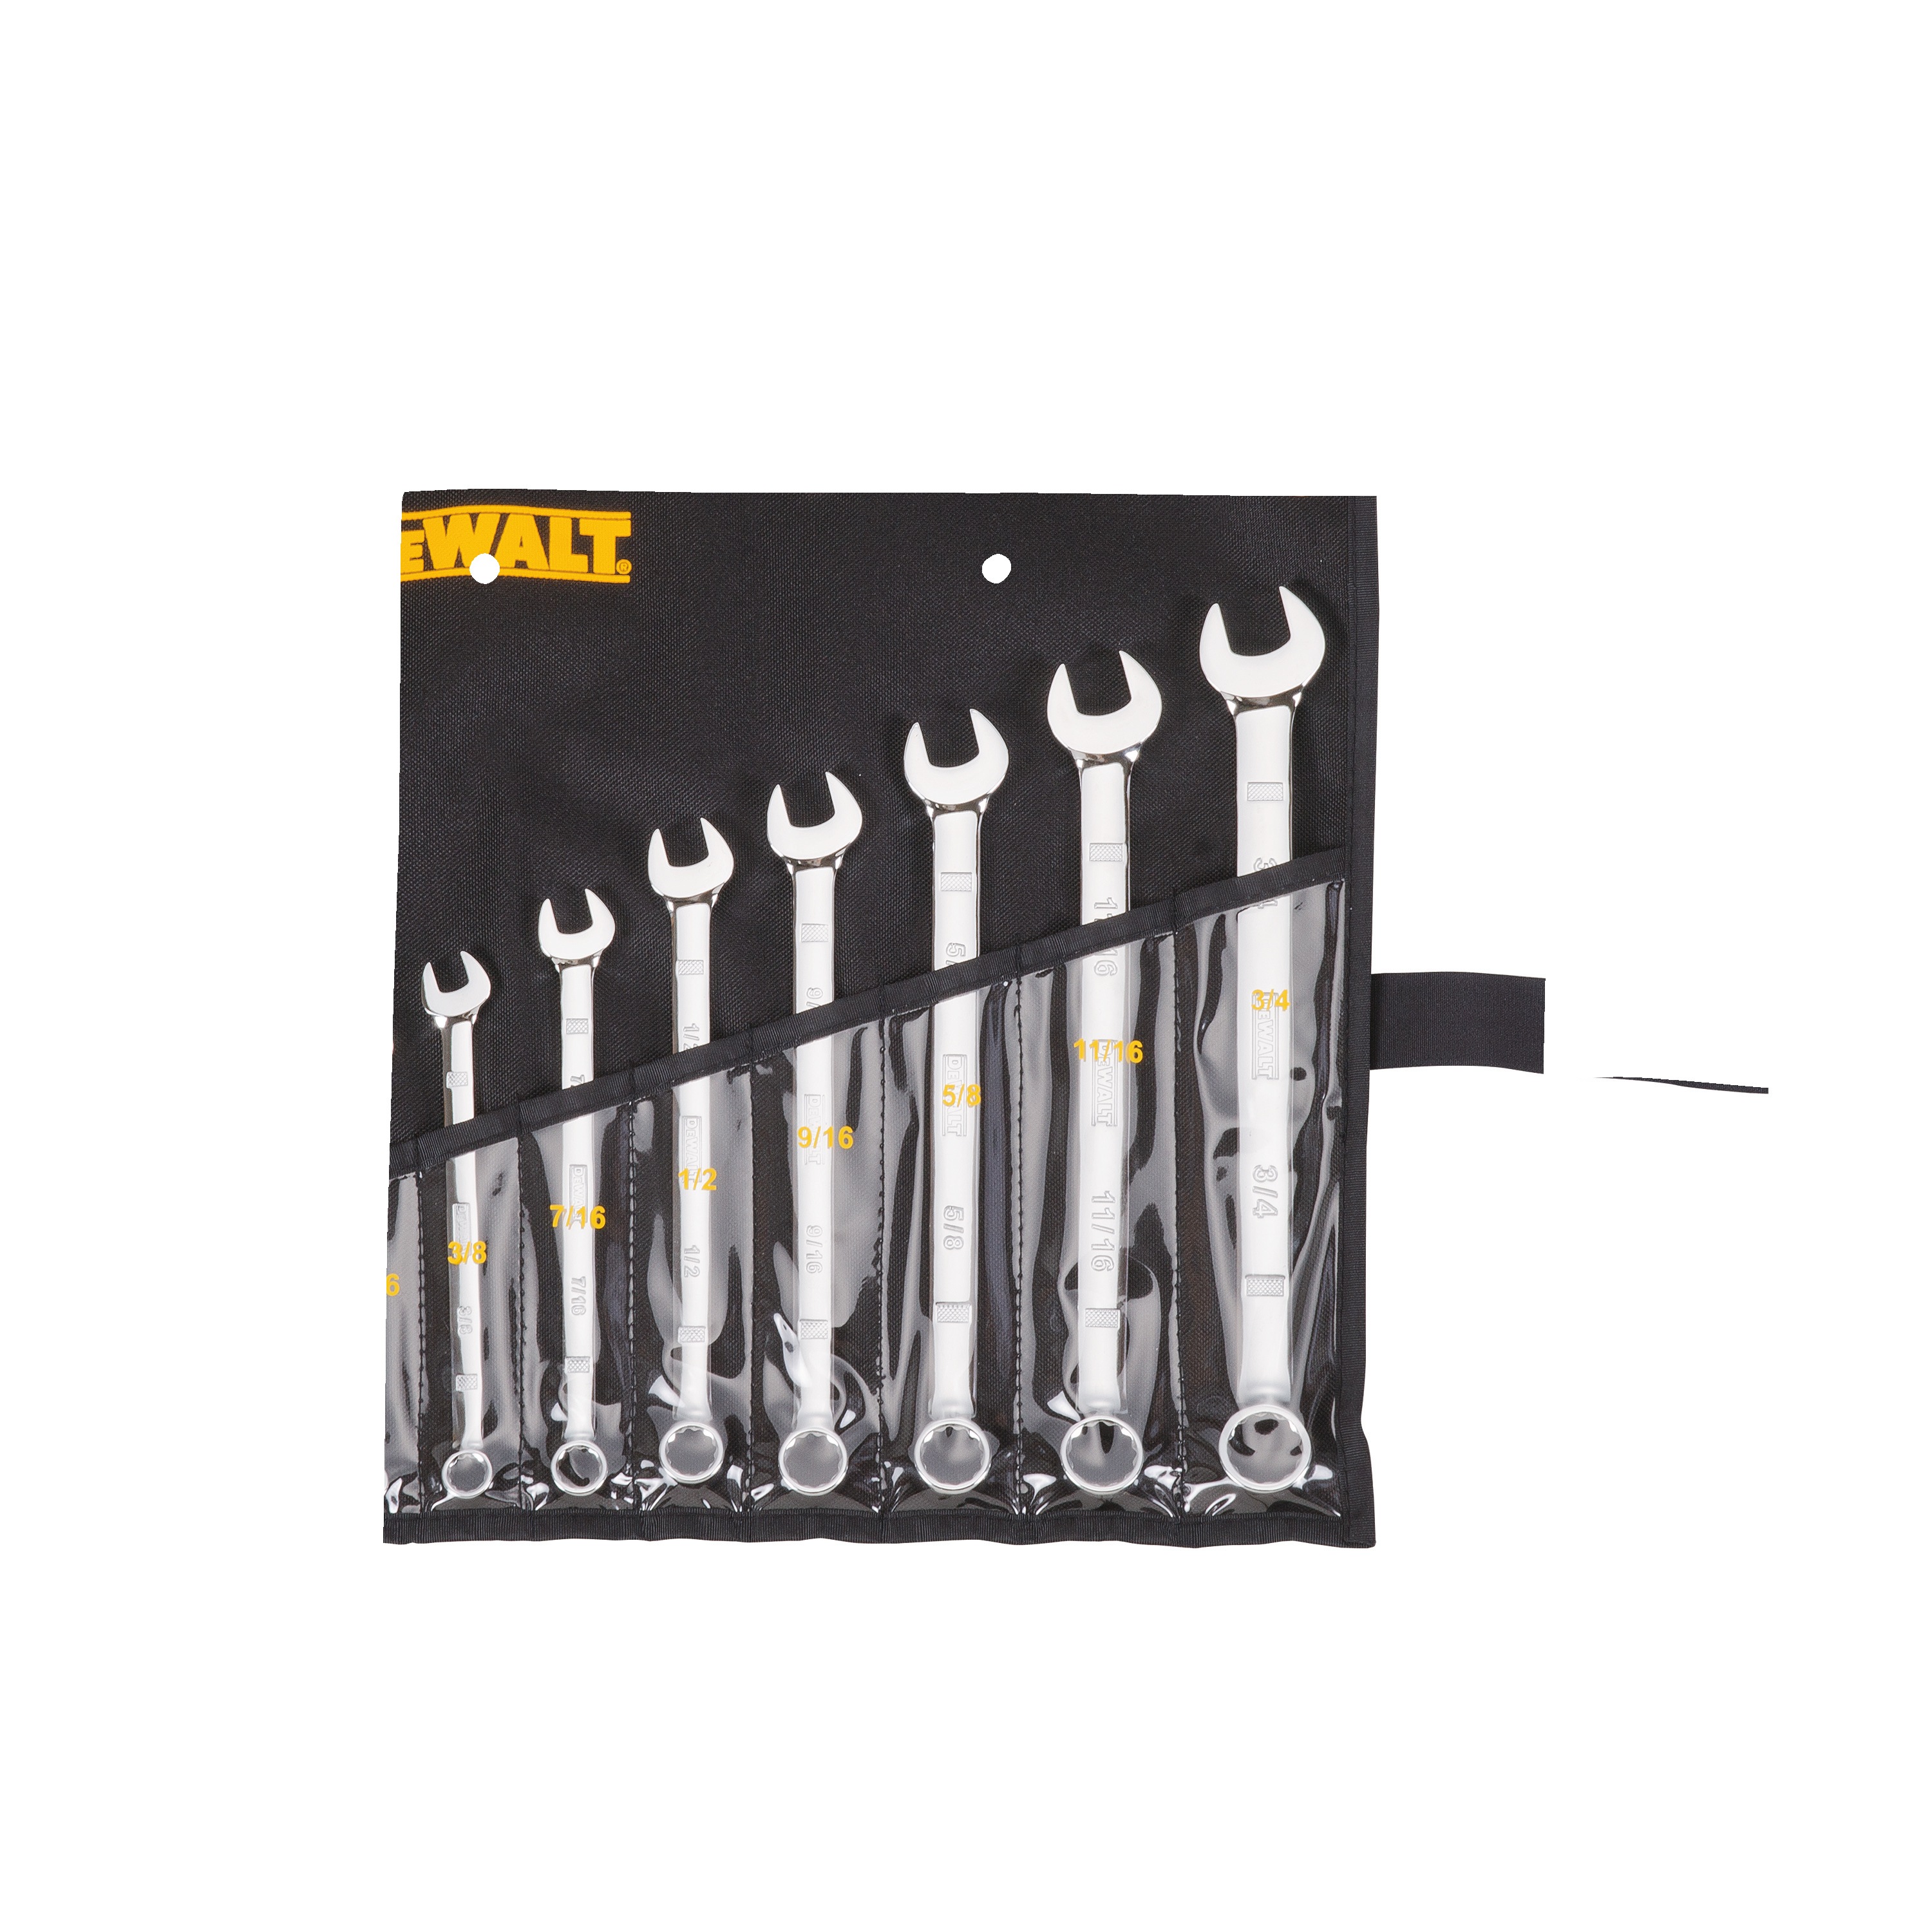 DEWALT 9 piece combination wrench set assembled in its kit.